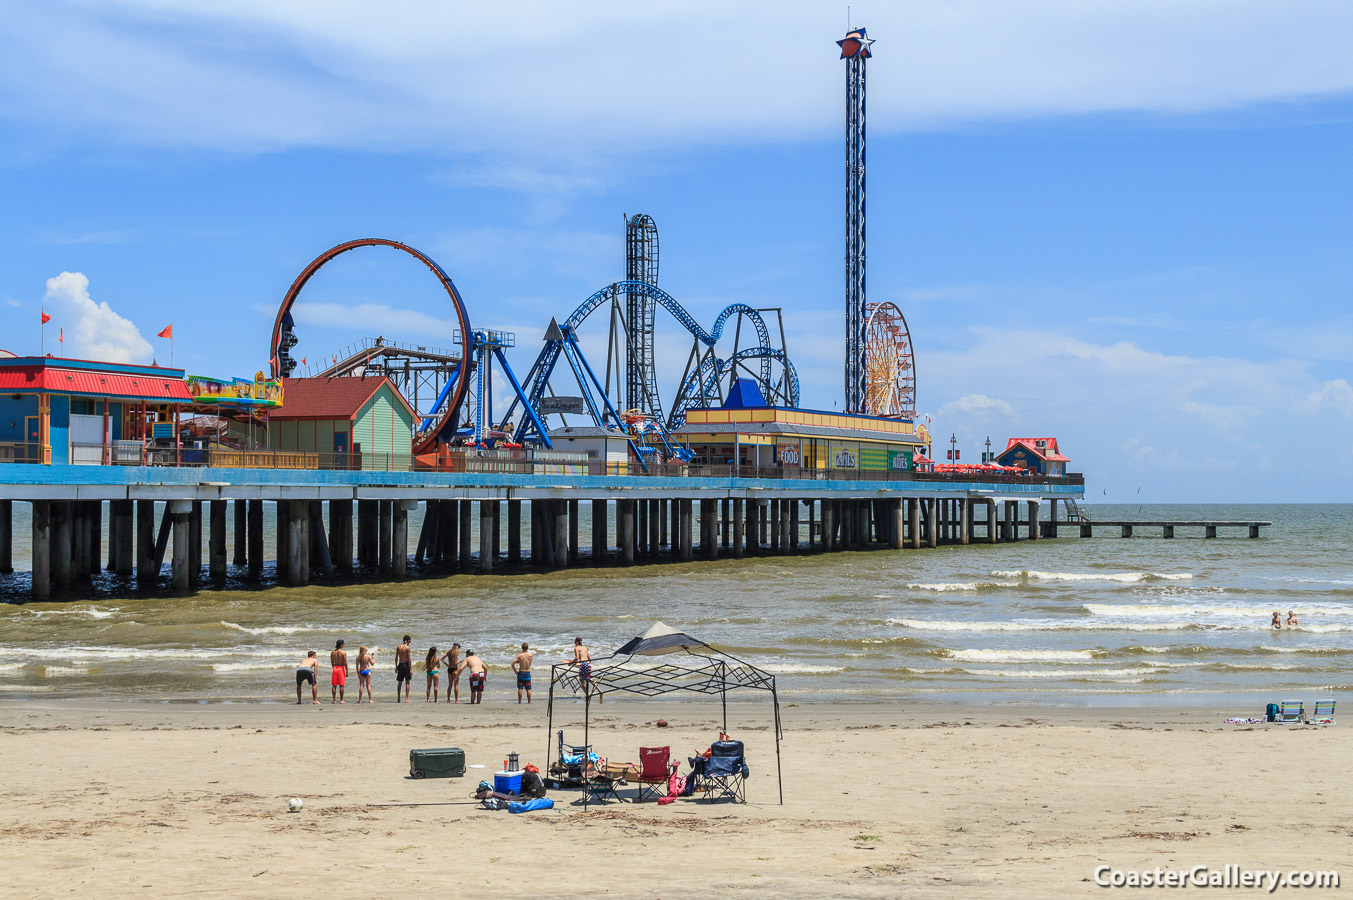 The Galeston Island Historic Pleasure Pier extends 1,130 feet over the water.